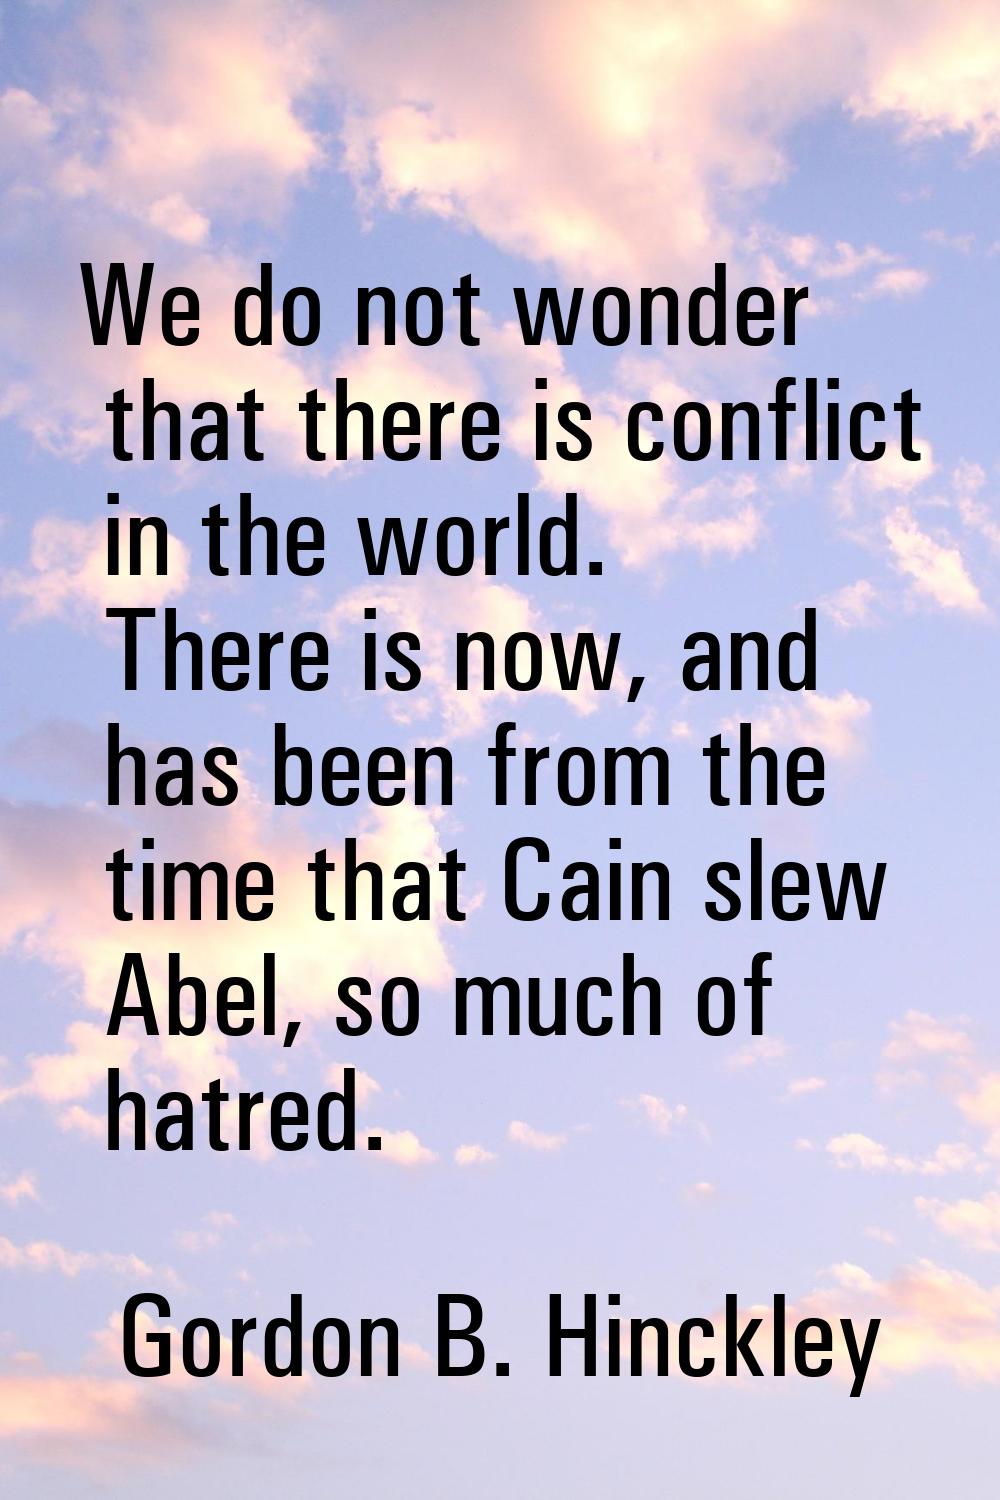 We do not wonder that there is conflict in the world. There is now, and has been from the time that